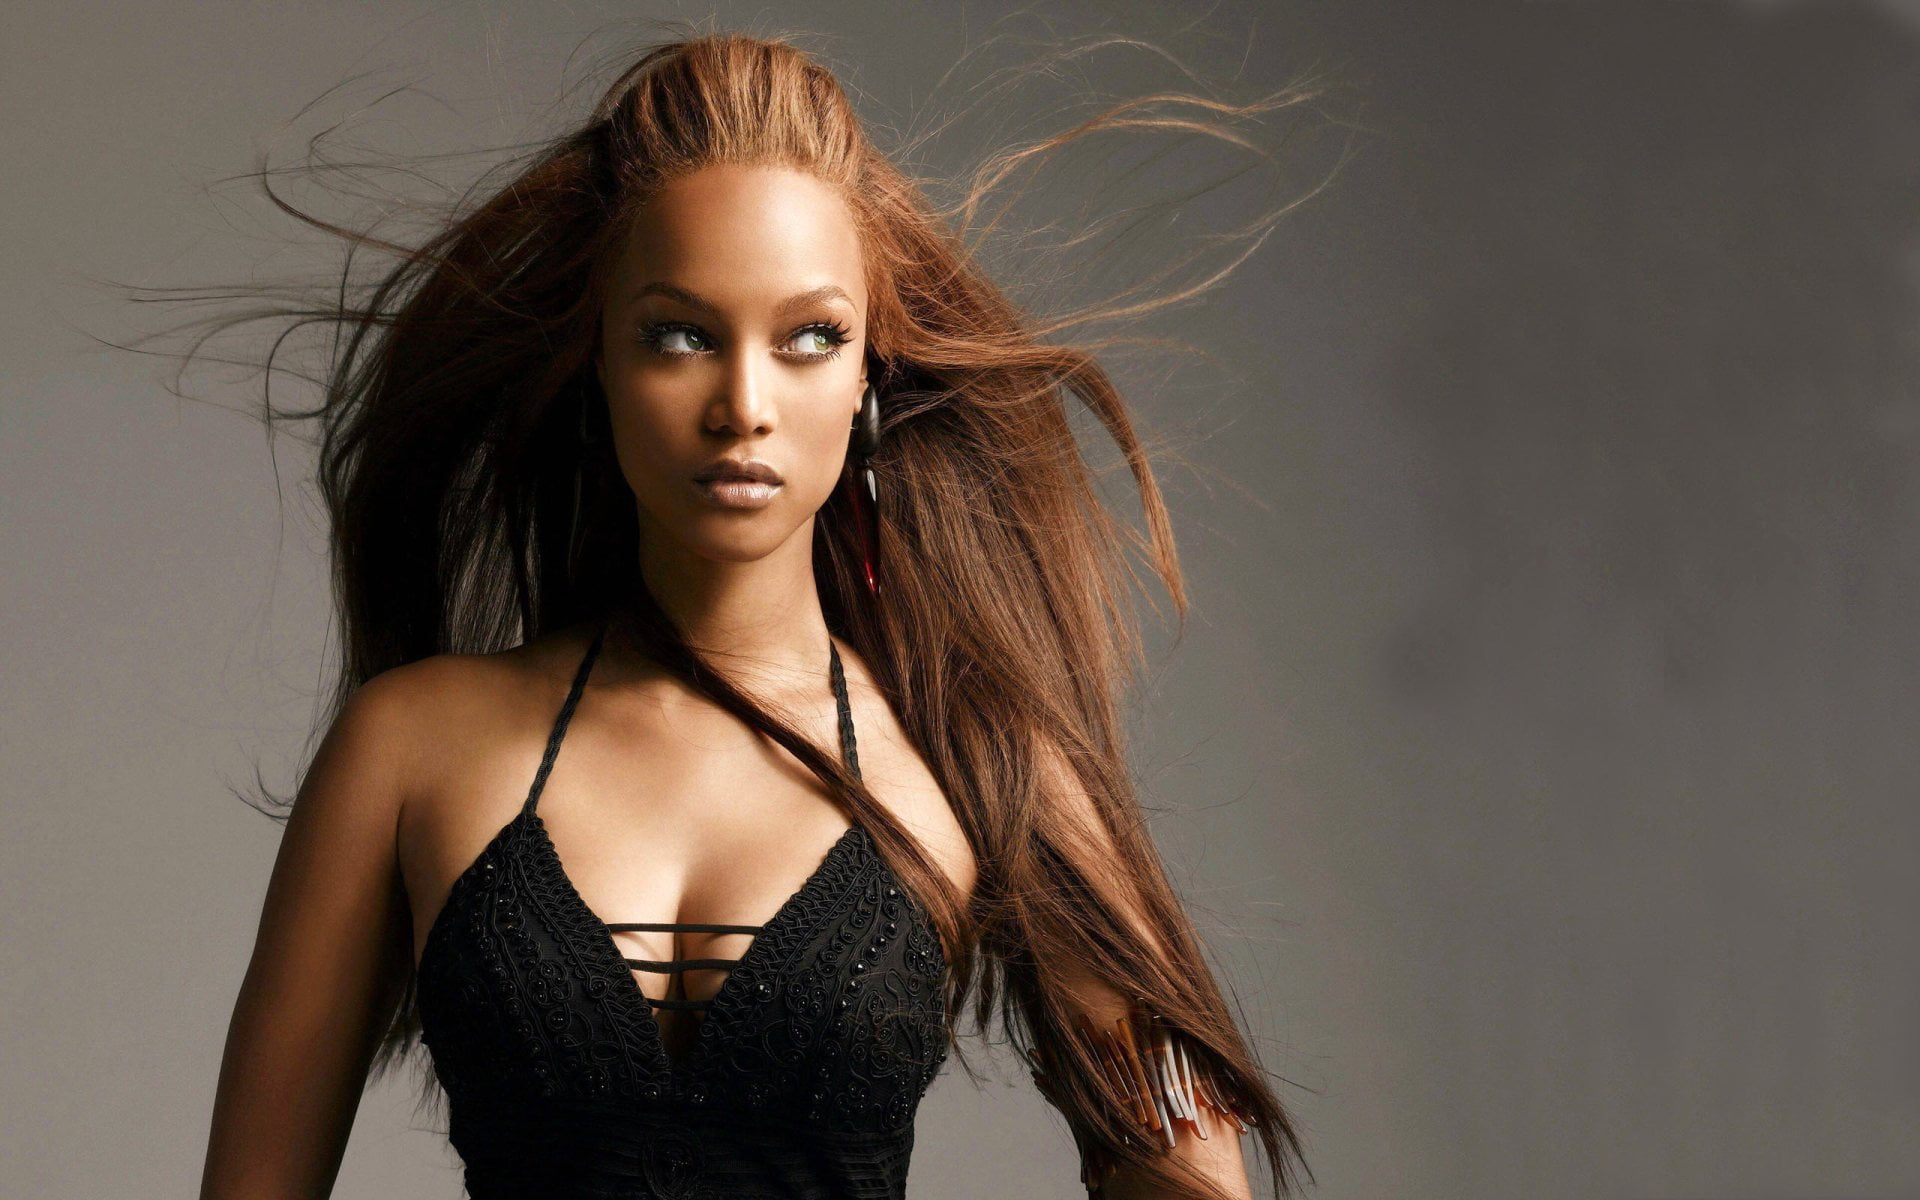 You are currently viewing Tyra Banks comparte foto sin maquillaje: “Merecen ver a mi yo real”